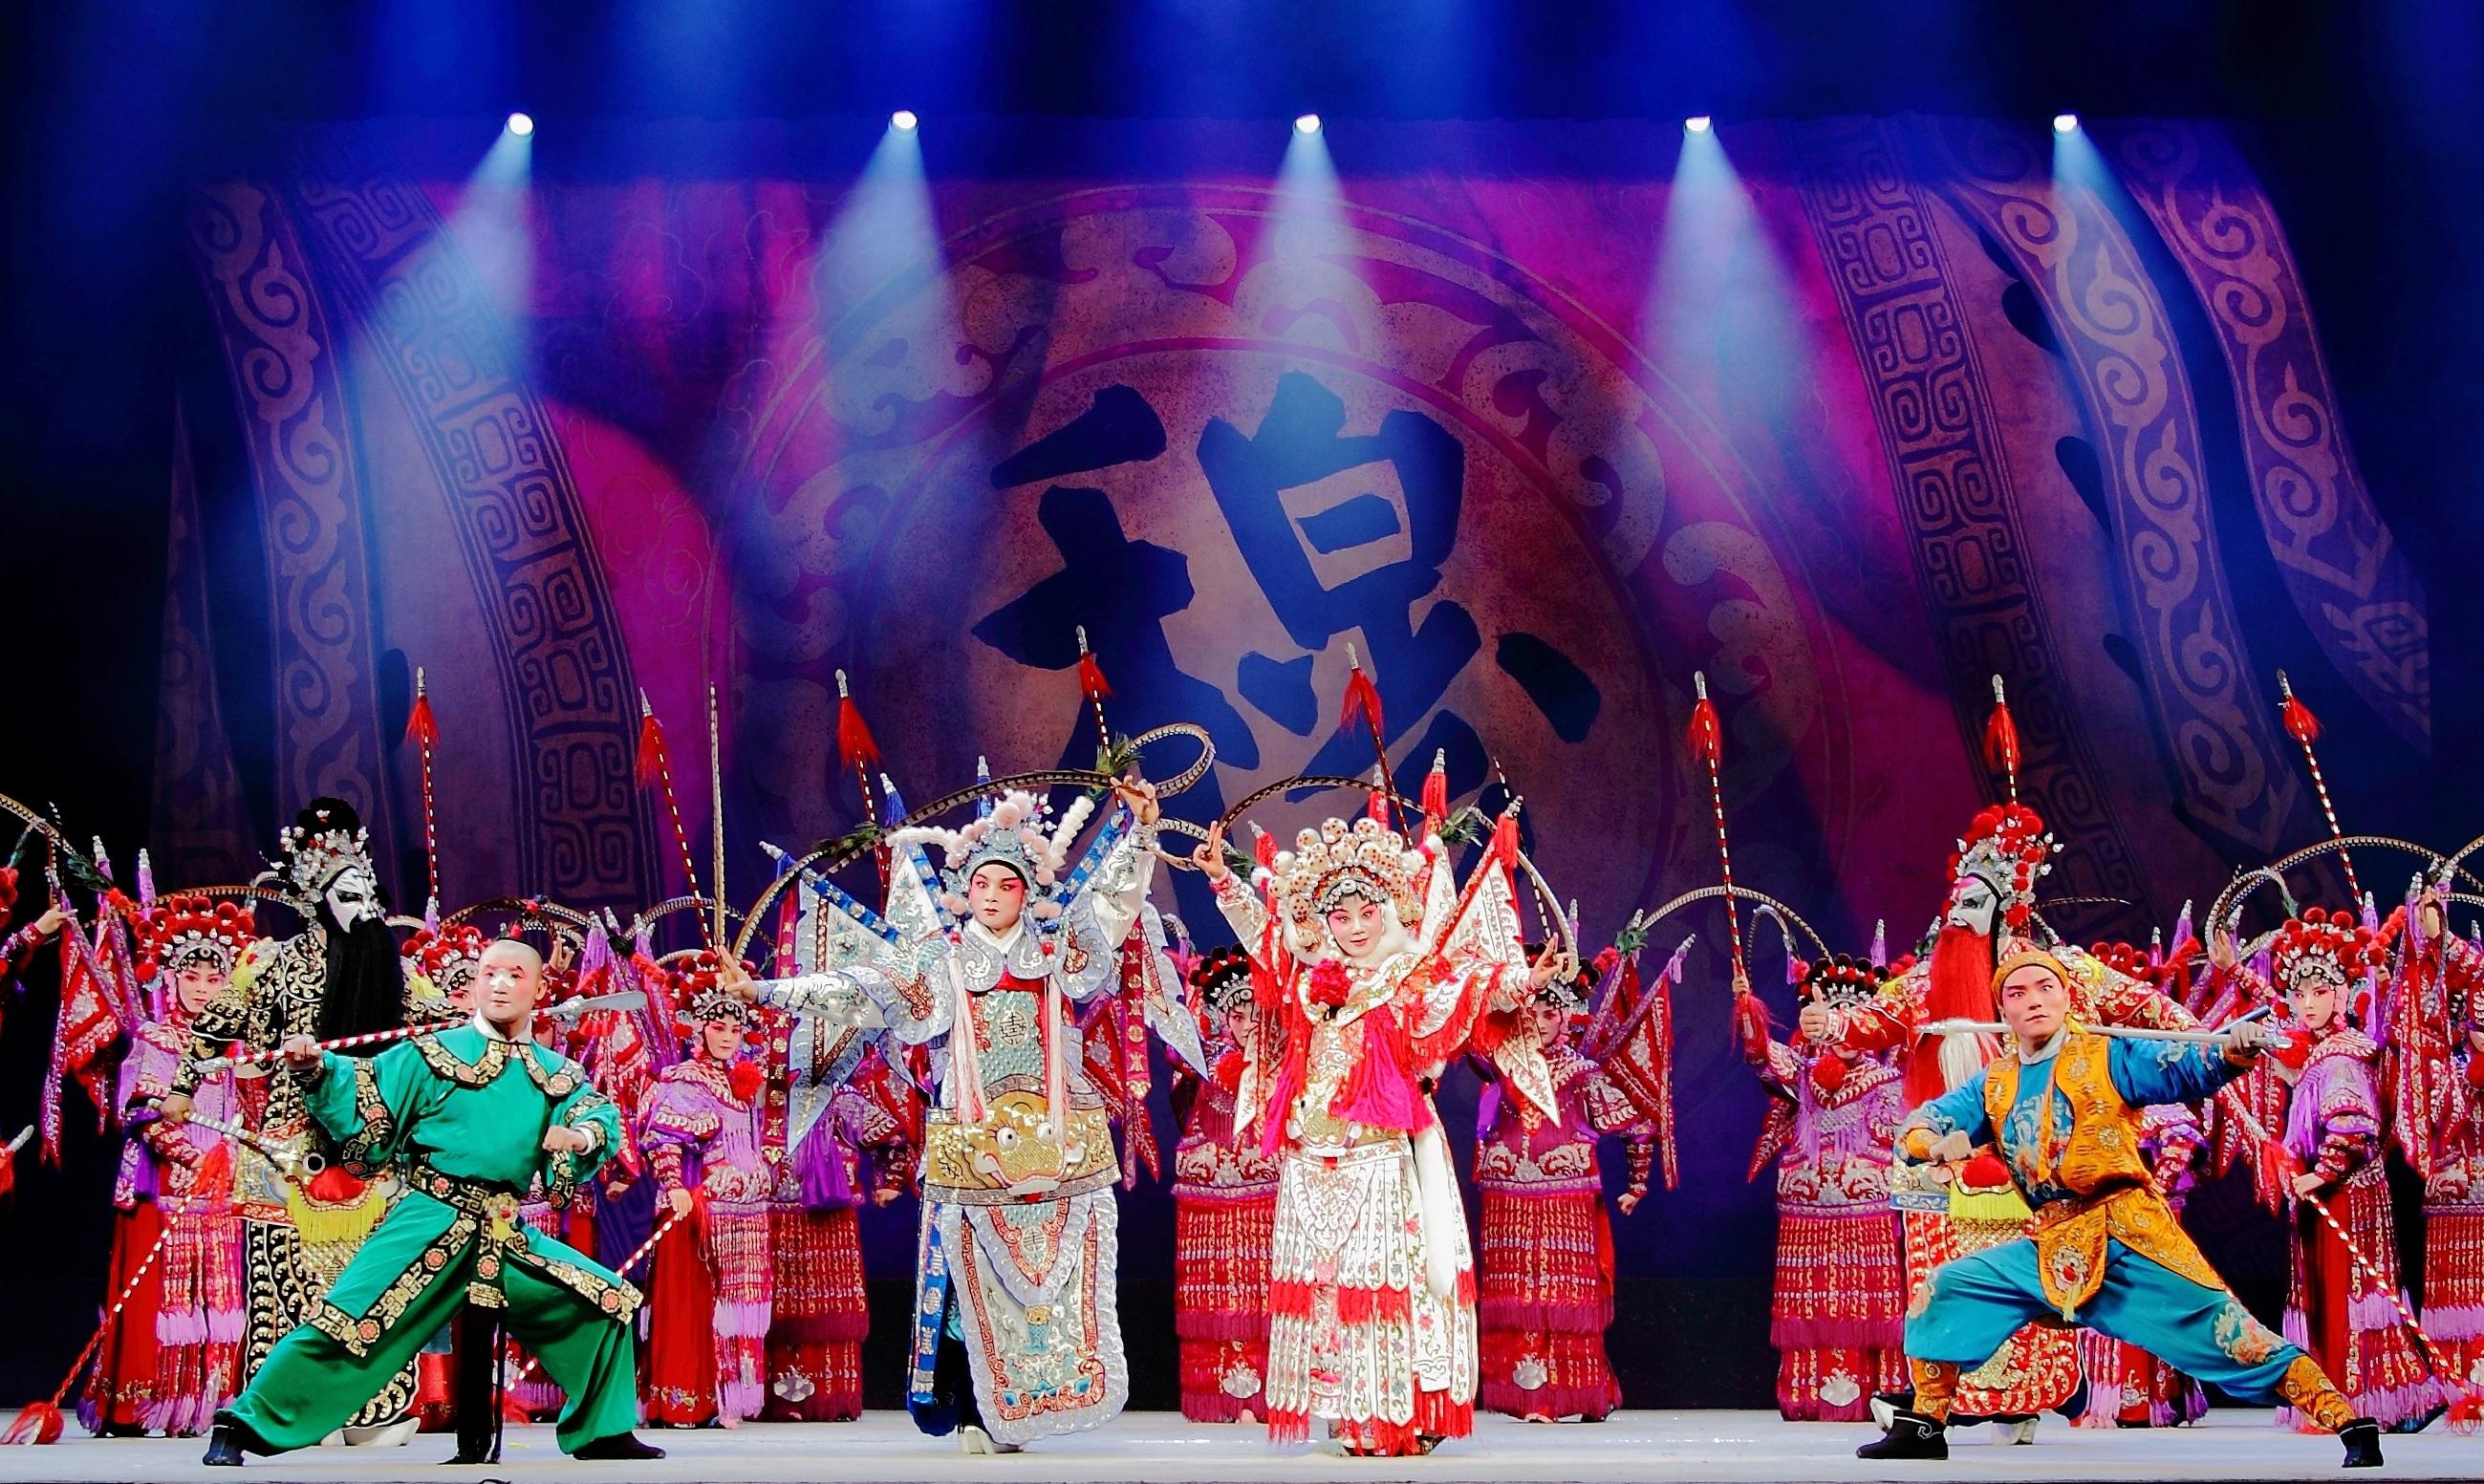 The Zhejiang Wu Opera Research Centre will return to Hong Kong to stage three Wu opera performances in late July at the inaugural Chinese Culture Festival, organised by the Leisure and Cultural Services Department. Photo shows a scene from "Mu Guiying".
